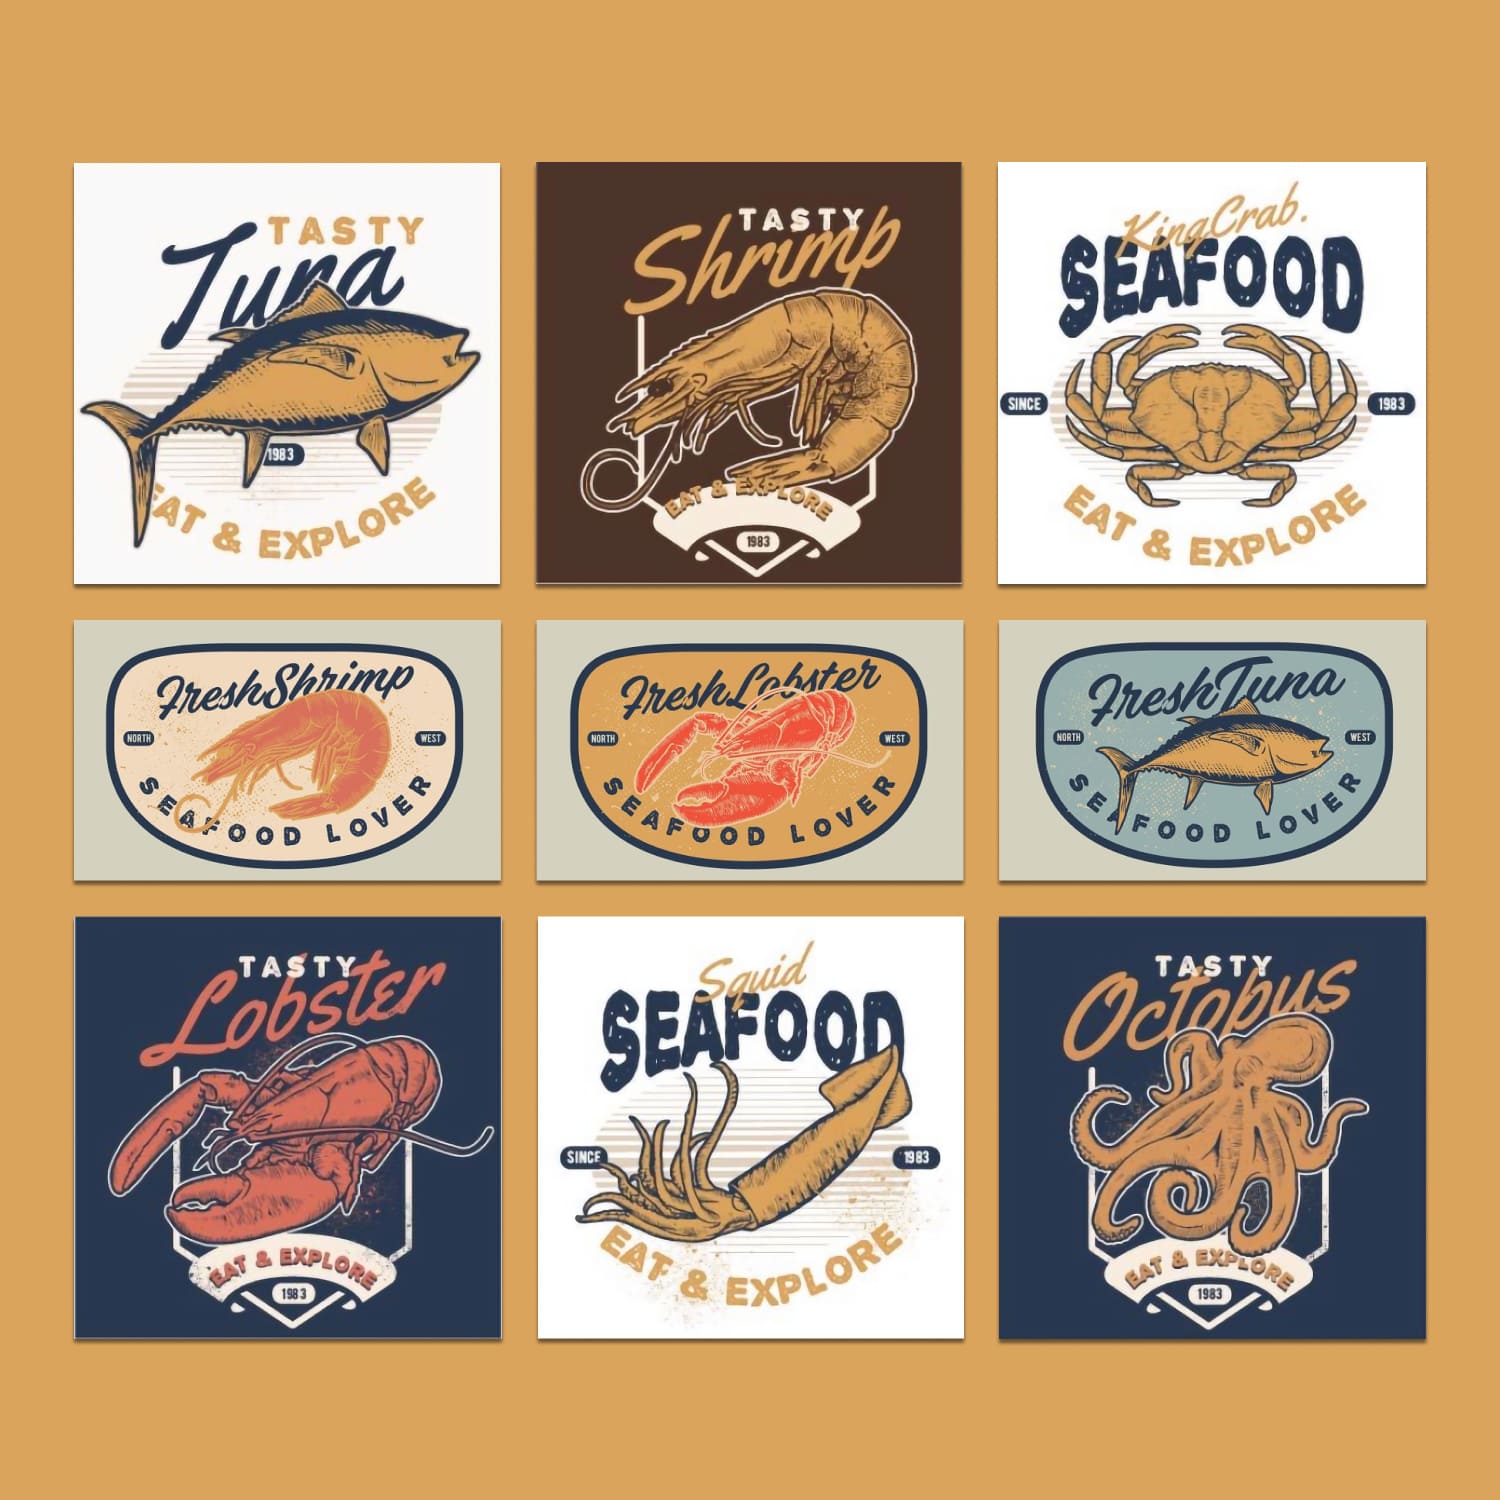 Seafood vector pack created by The Bold Studio.